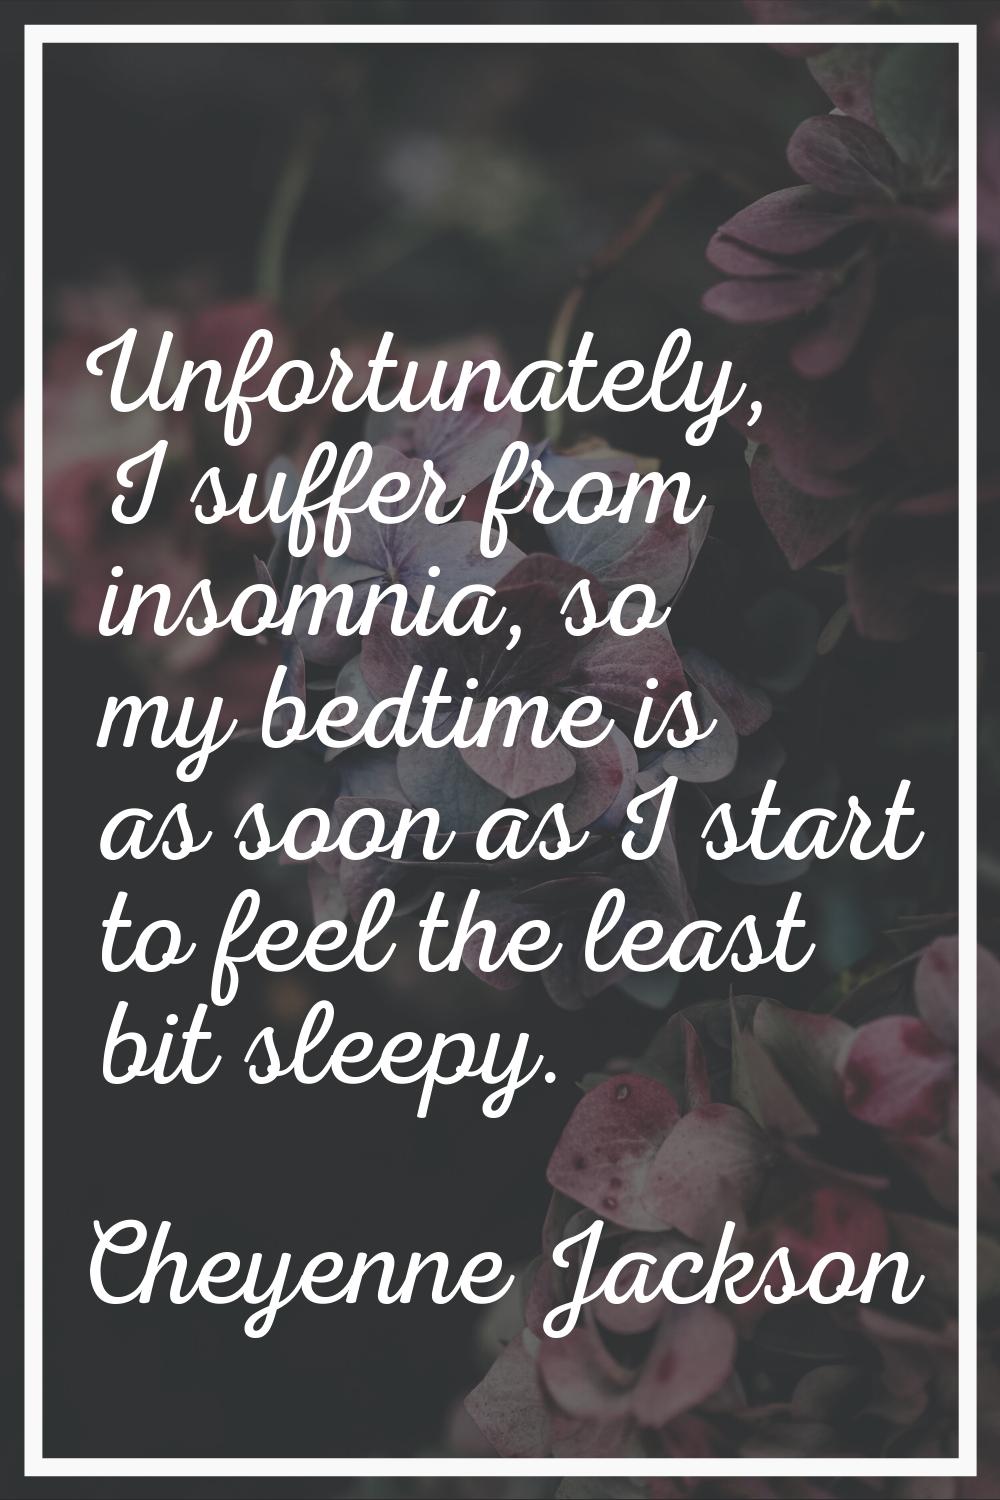 Unfortunately, I suffer from insomnia, so my bedtime is as soon as I start to feel the least bit sl